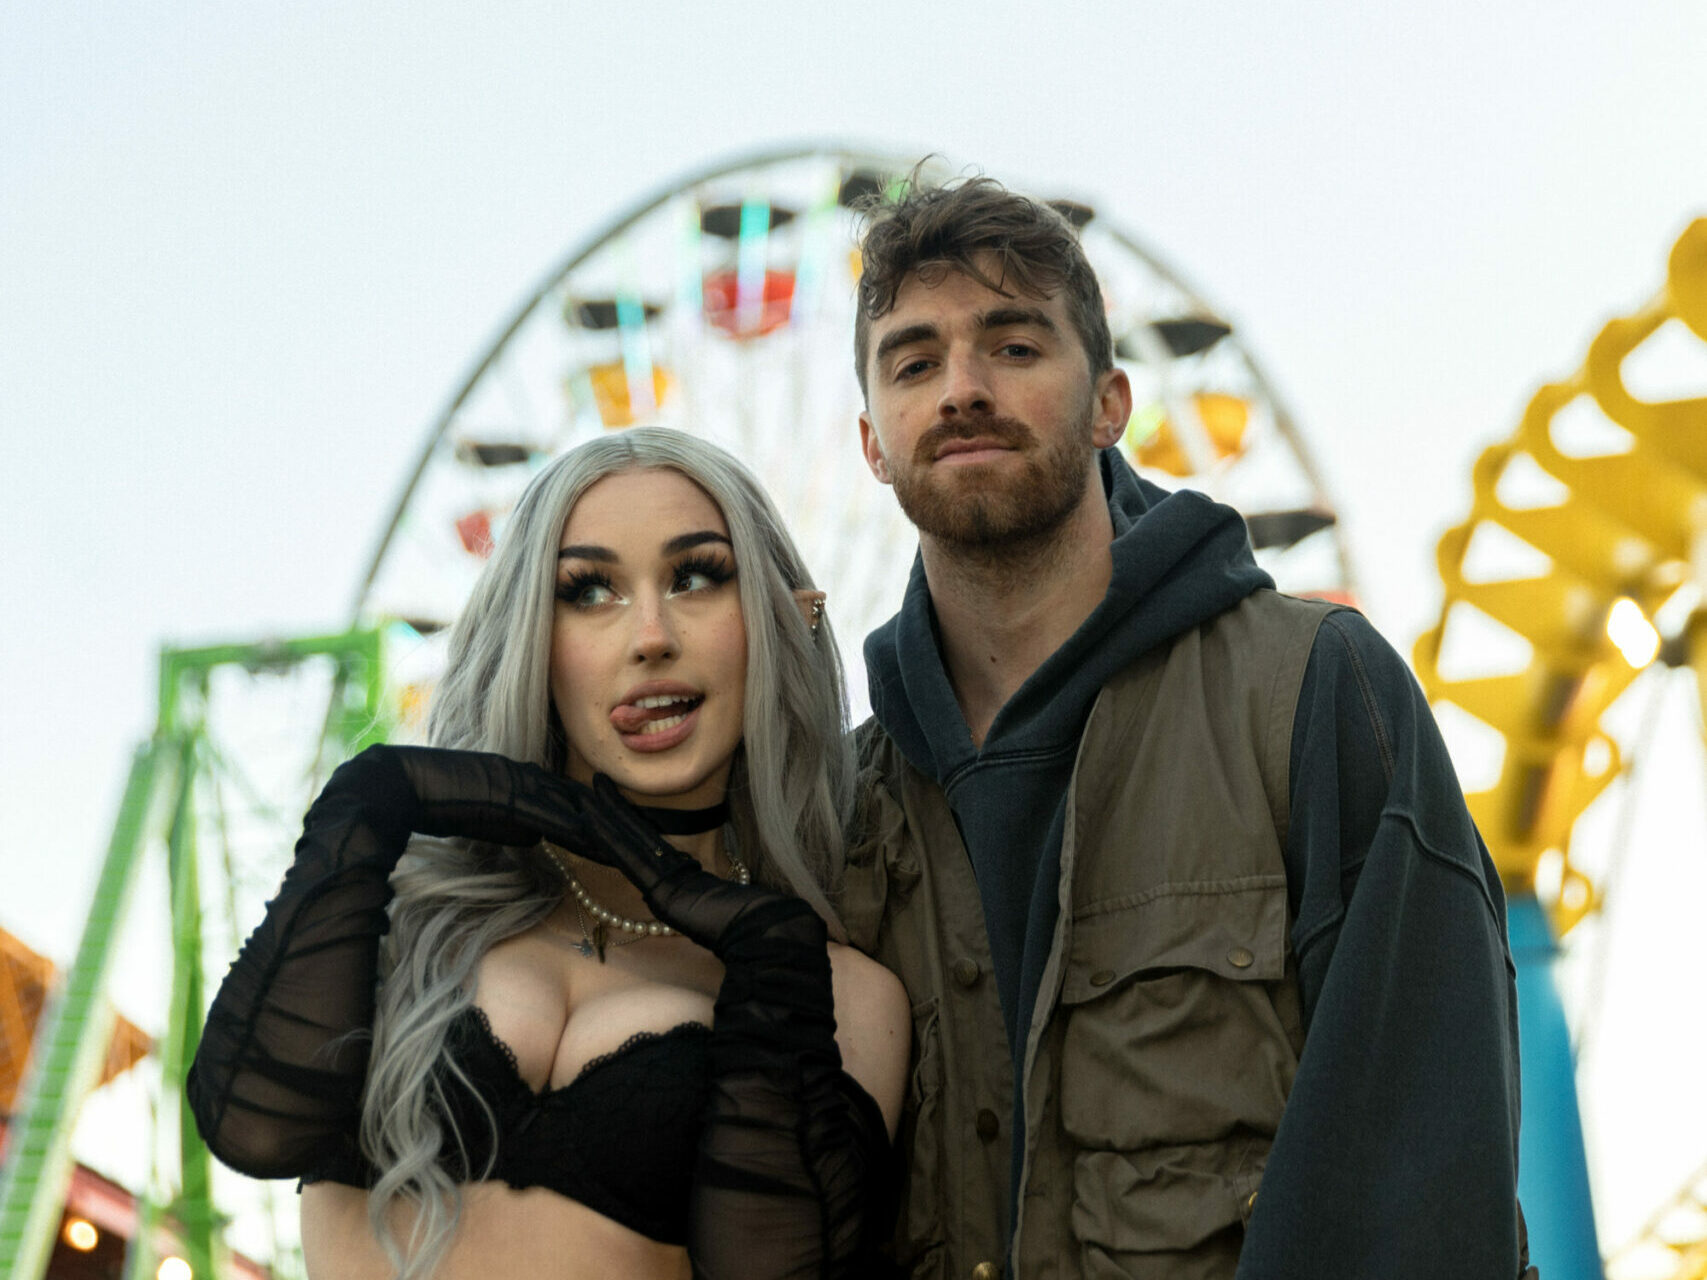 Chainsmokers Drew Taggart and bludnymph